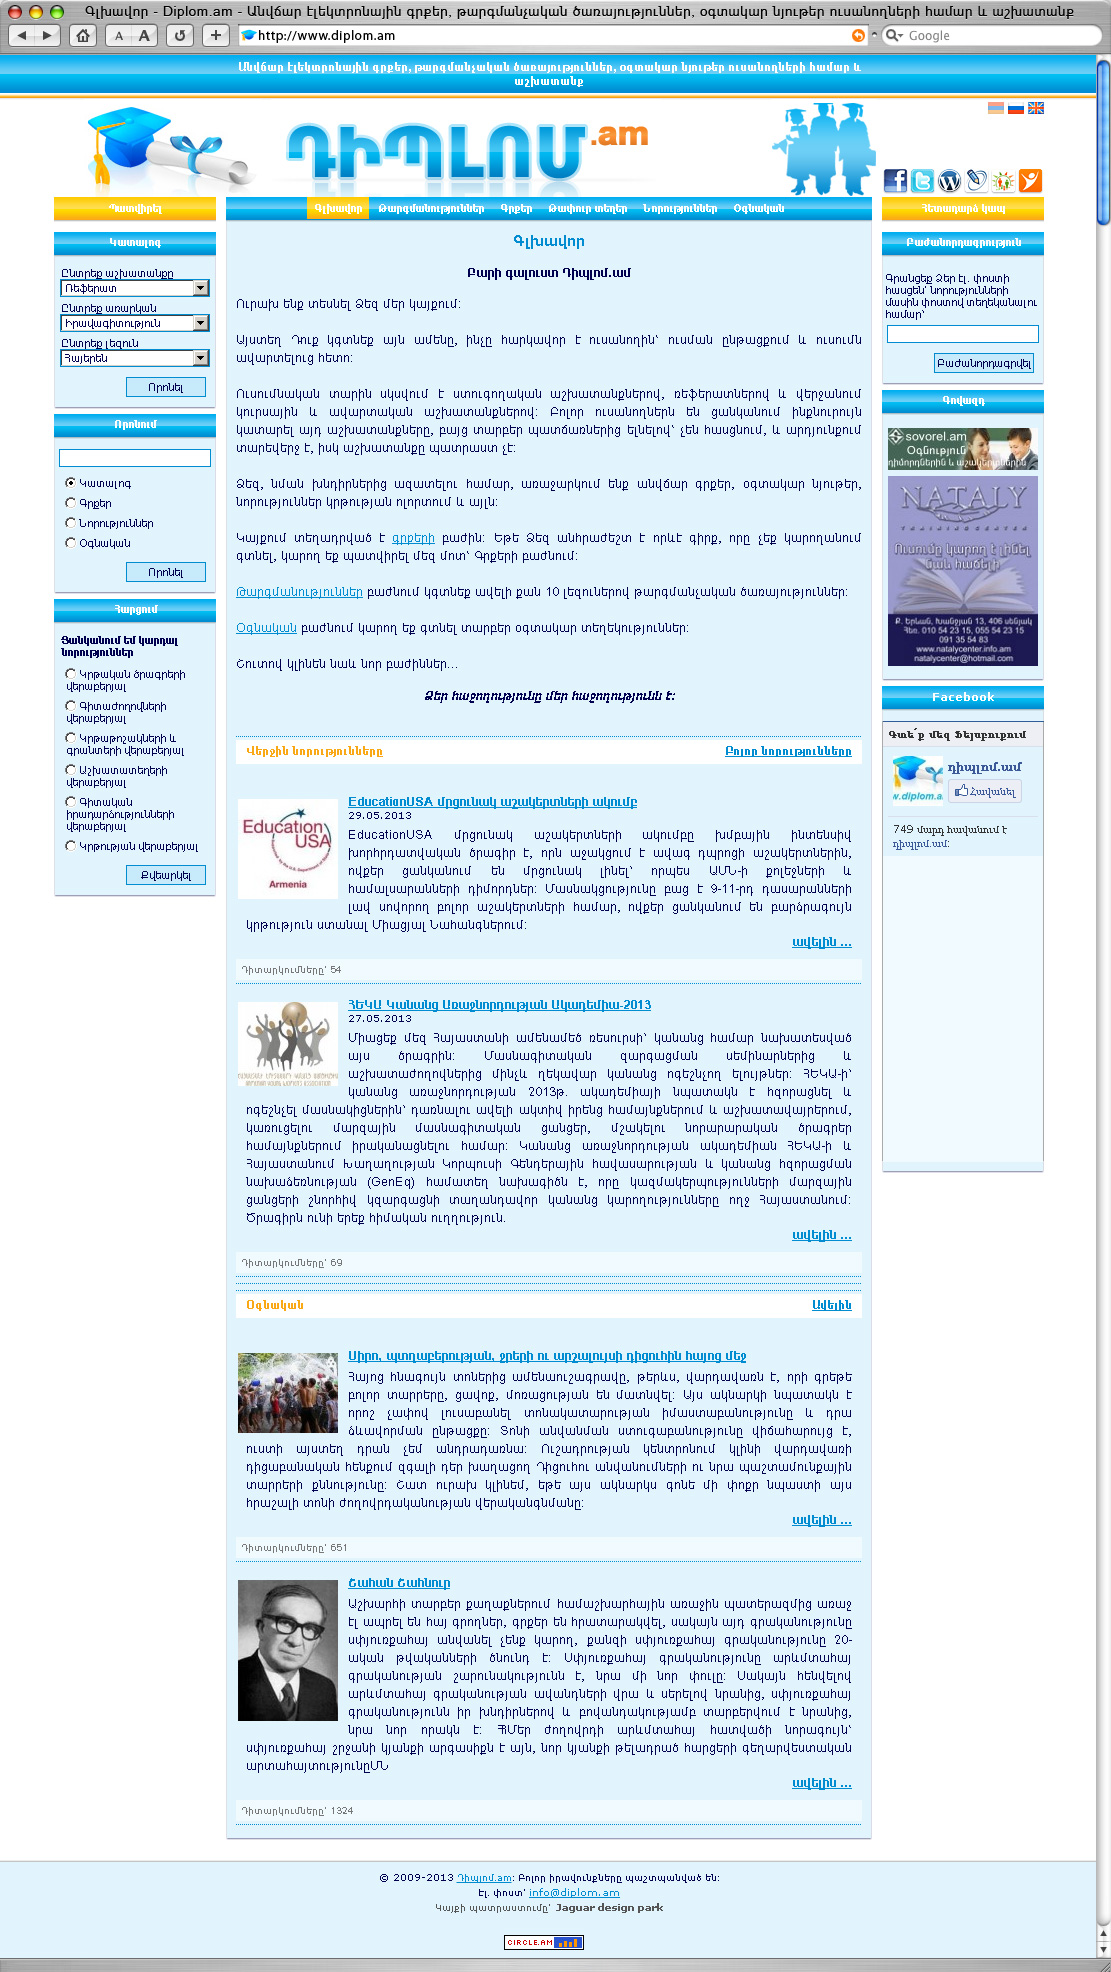 DIPLOM.am-Free e-books, translation services, useful information for students and job